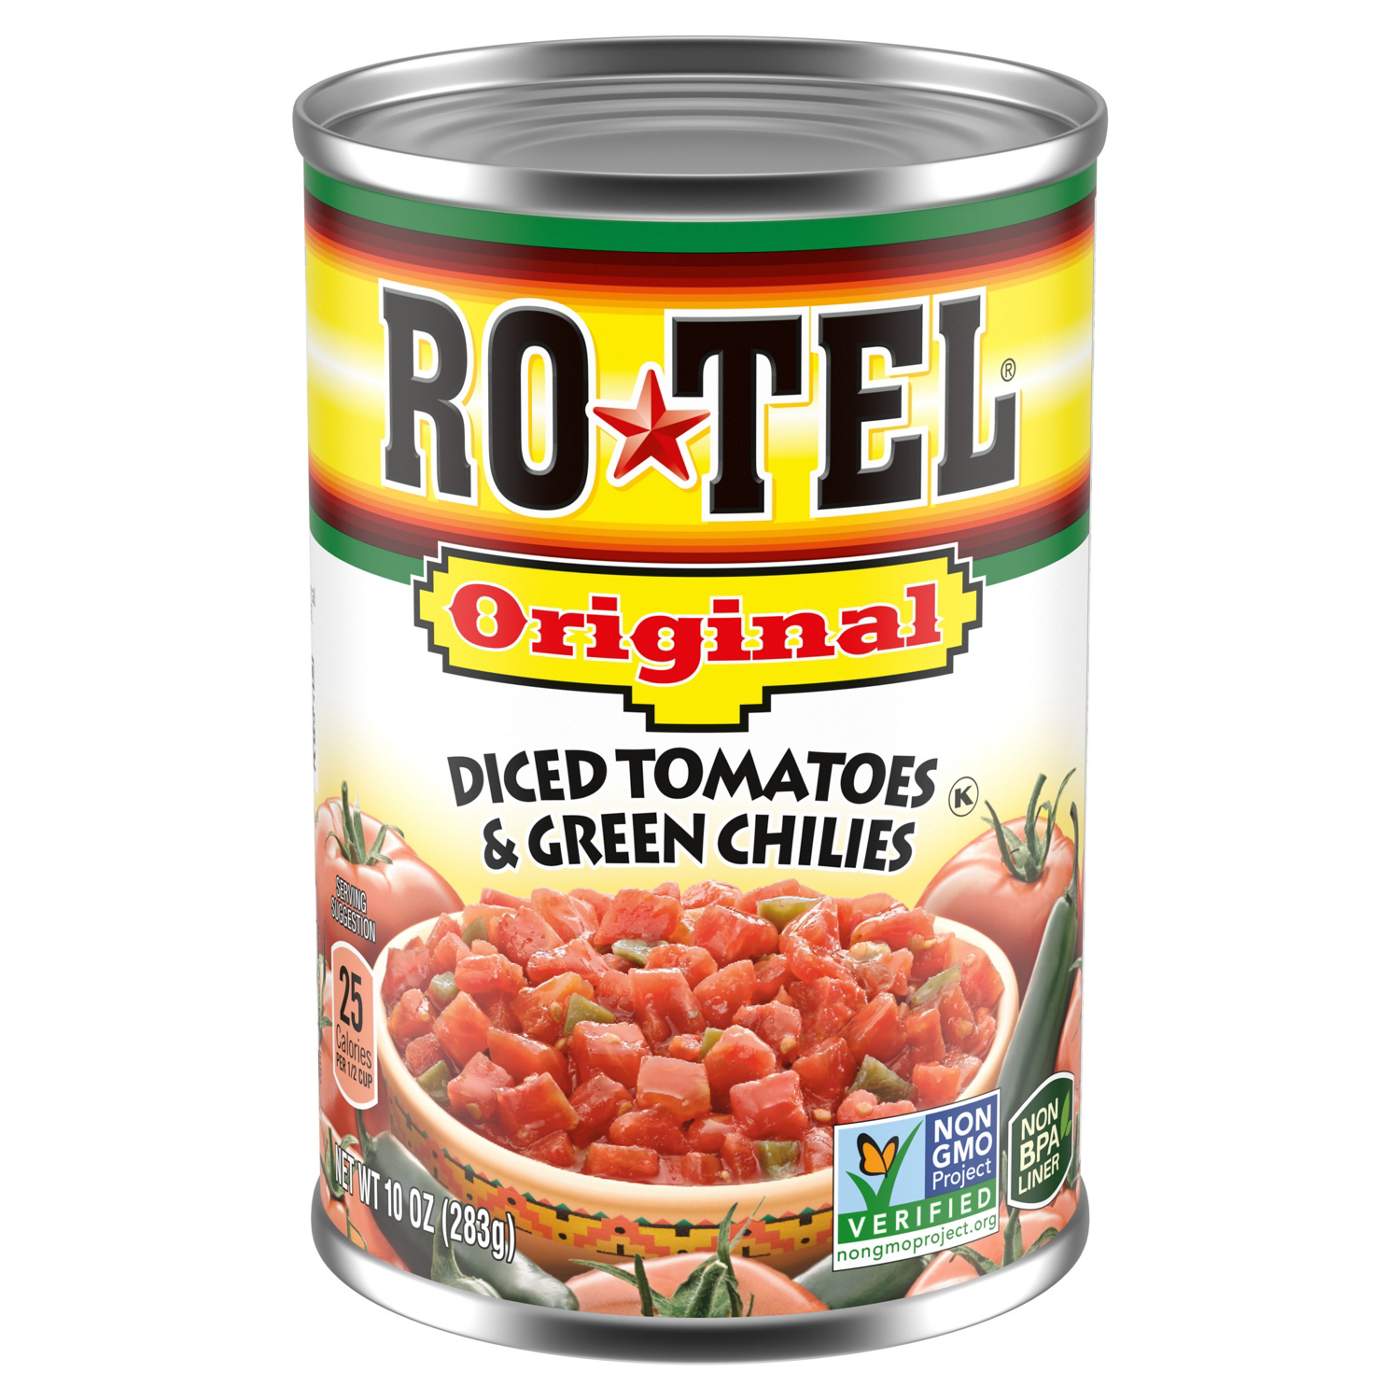 Ro-Tel Original Diced Tomatoes and Green Chilies; image 1 of 6